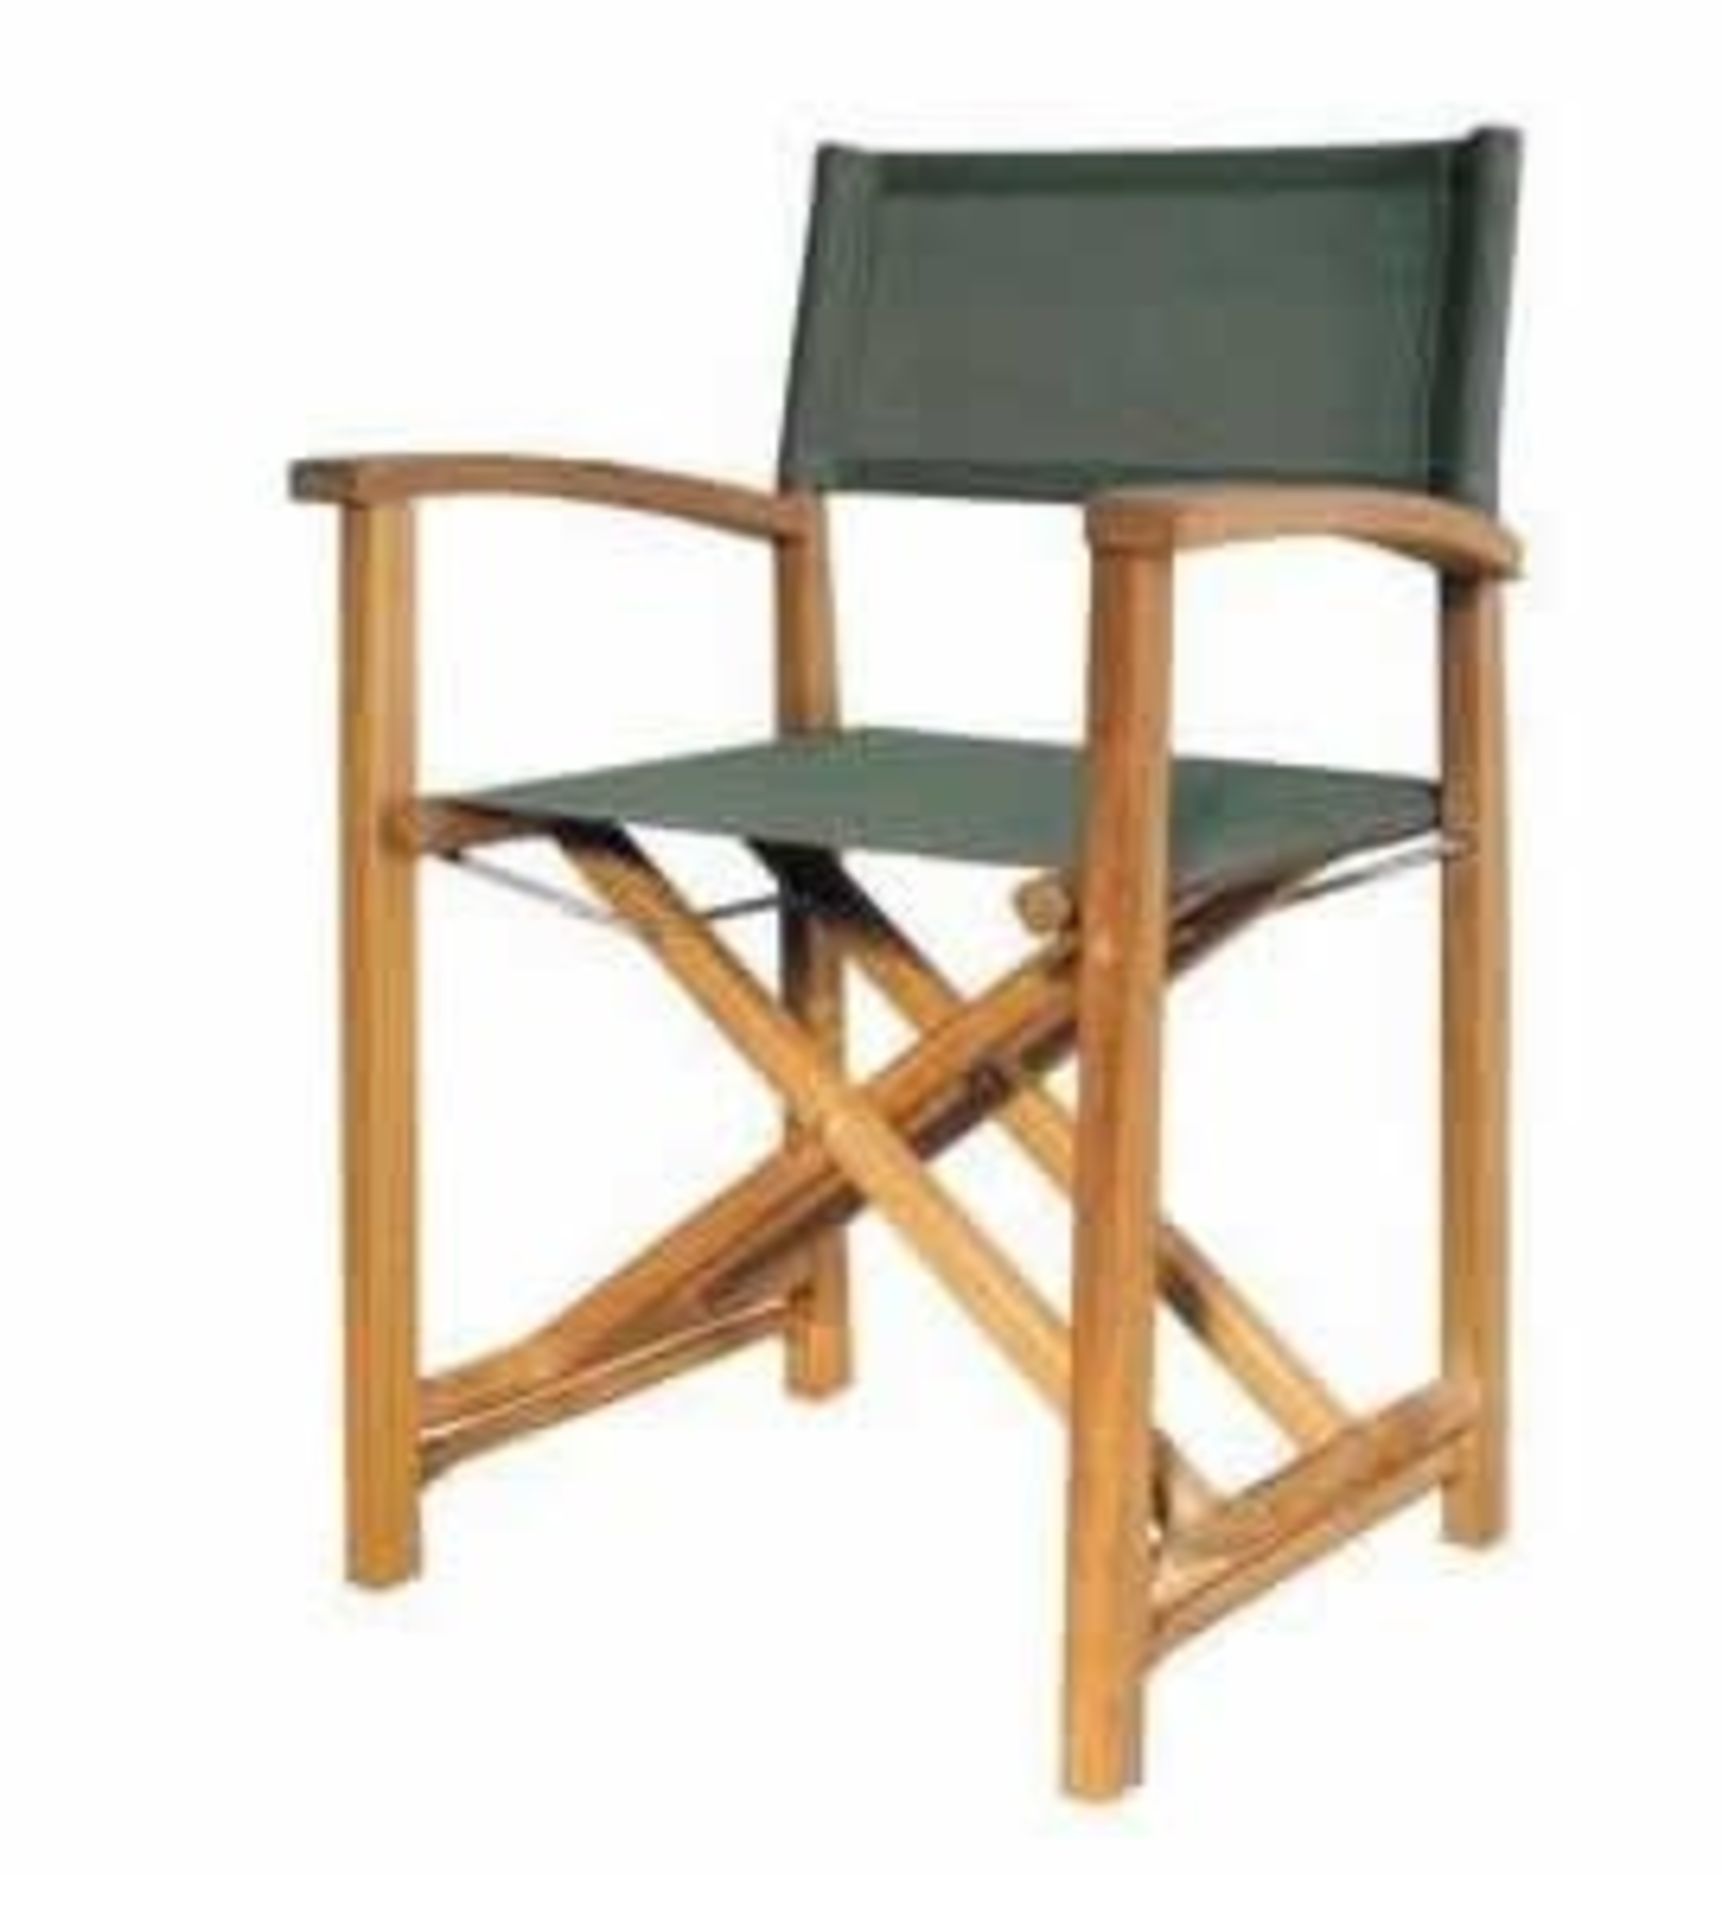 V Brand New Teak Canvas Folding Garden Chair - Dimensions 48 x 59 x 90 - Note Items Is Available